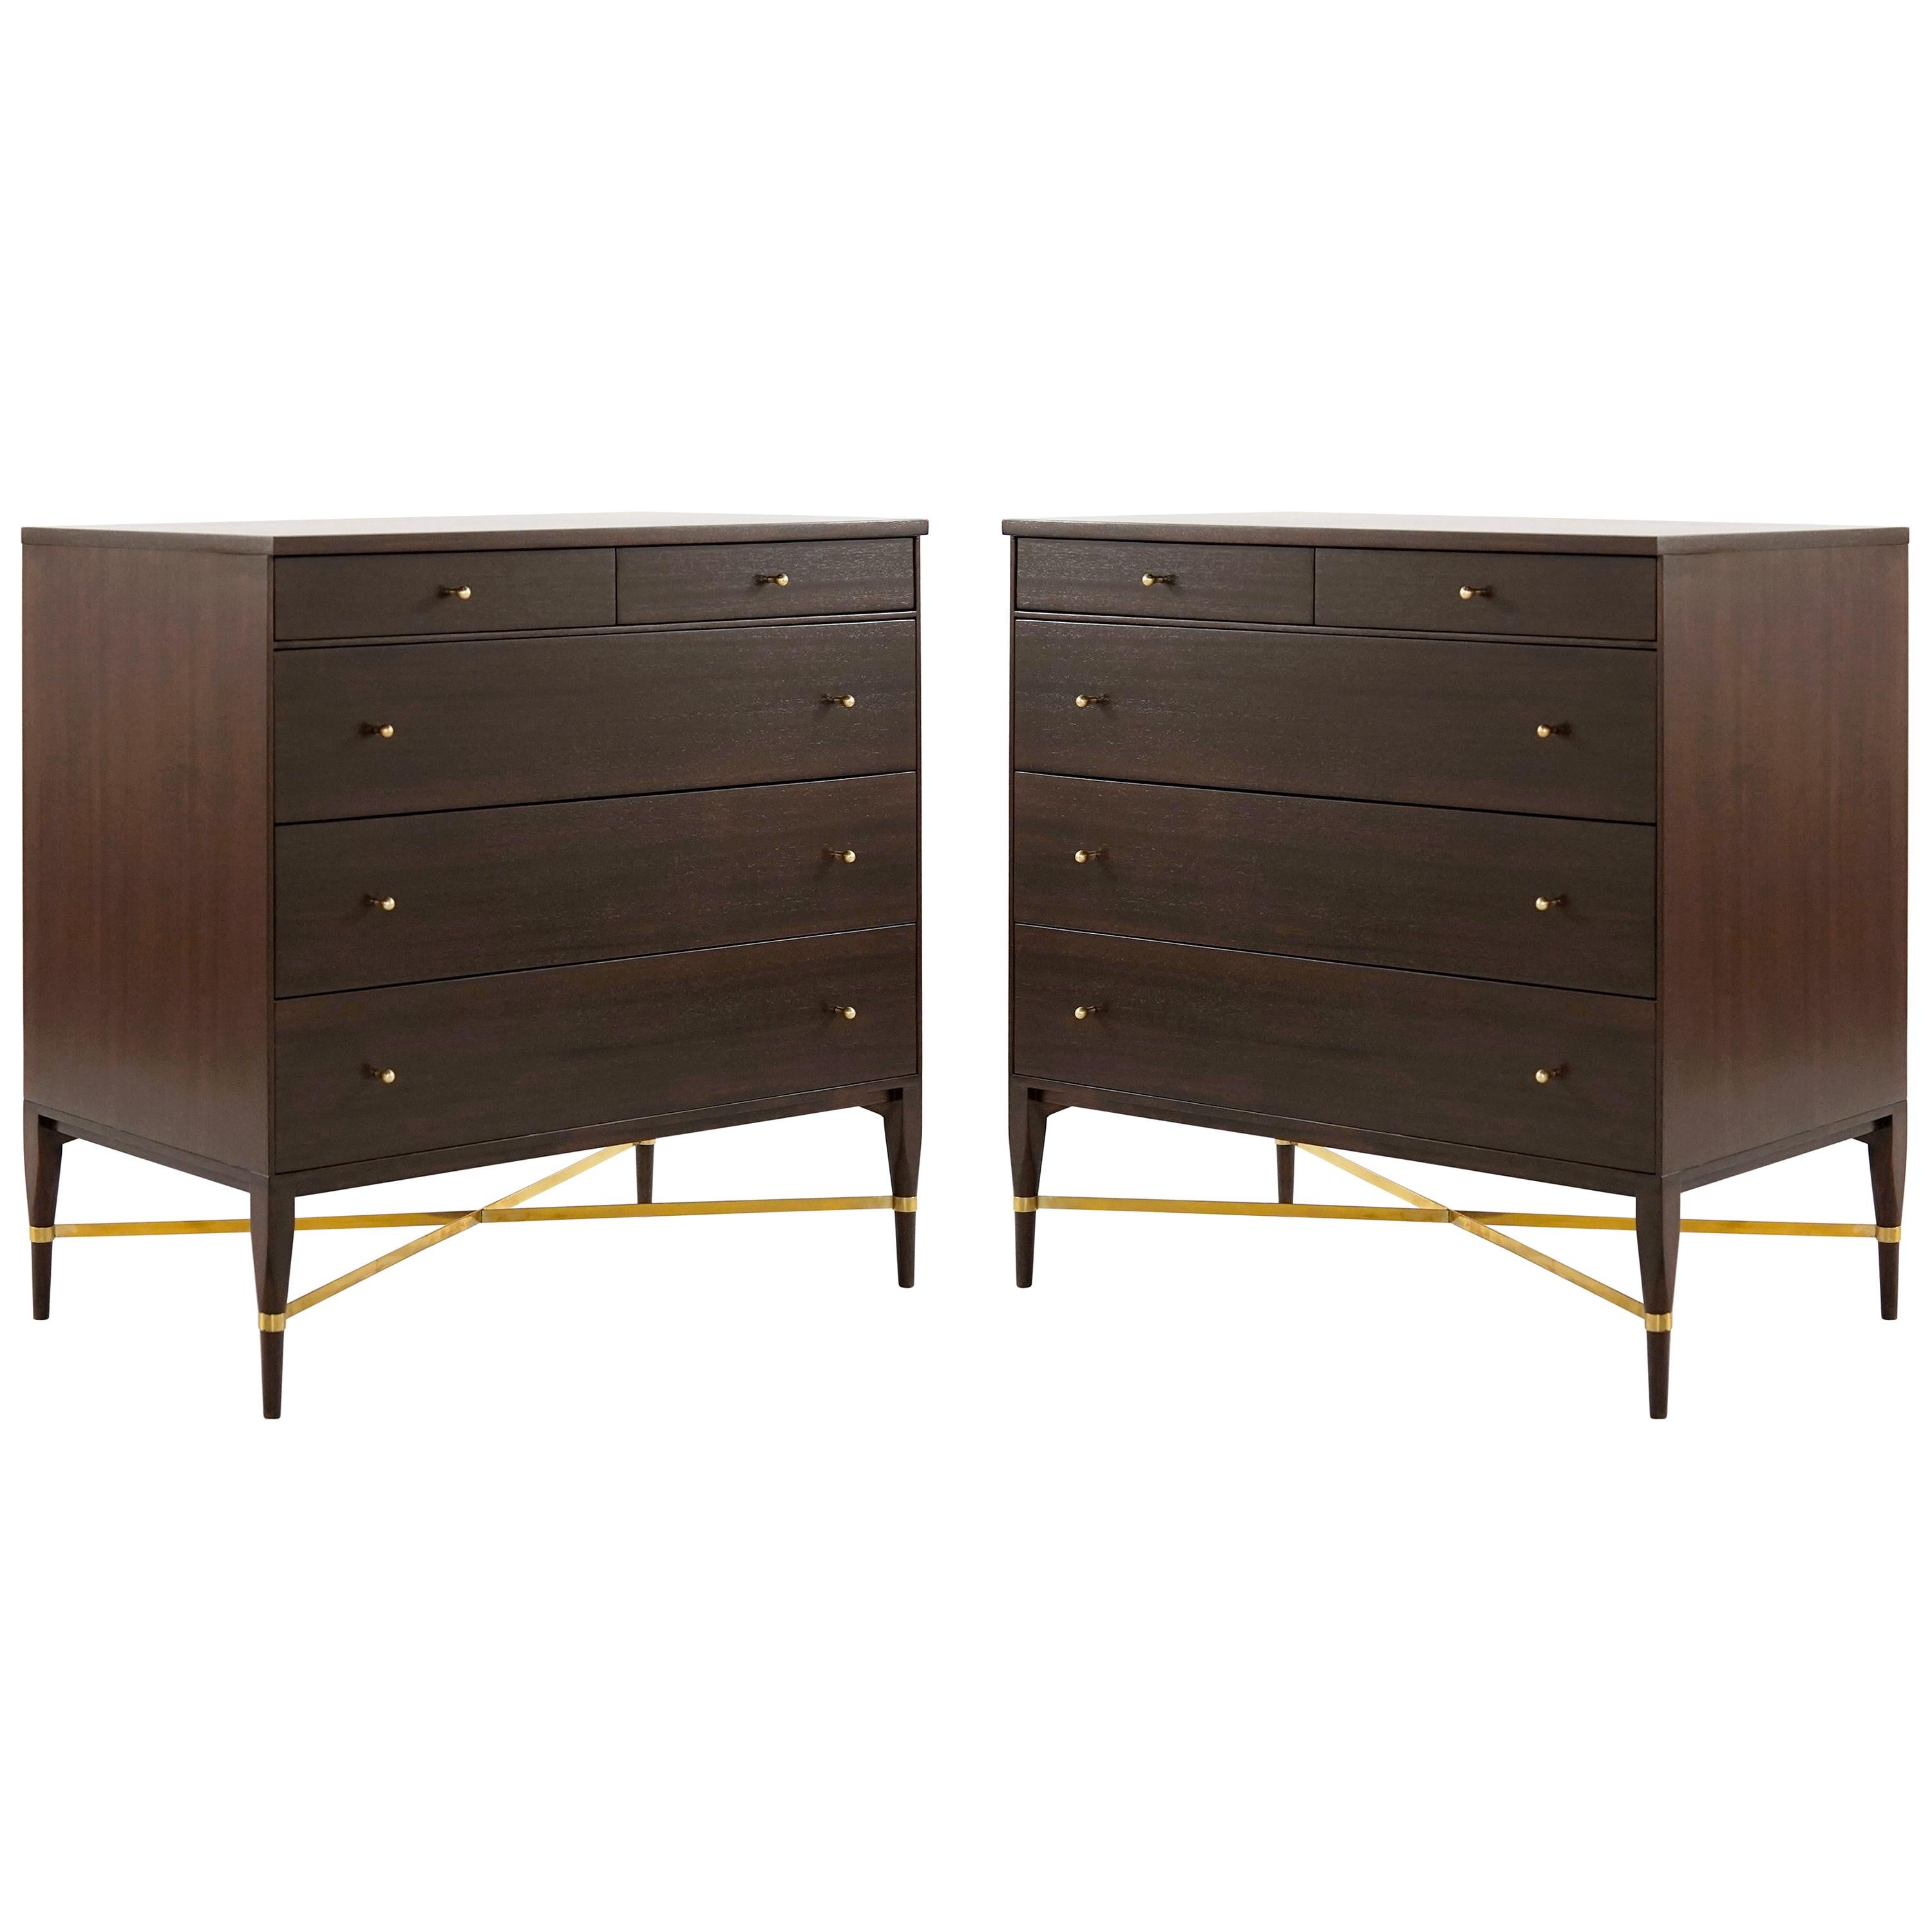 Pair of Bedside Mahogany Chests by Paul McCobb, Calvin Group, 1950s